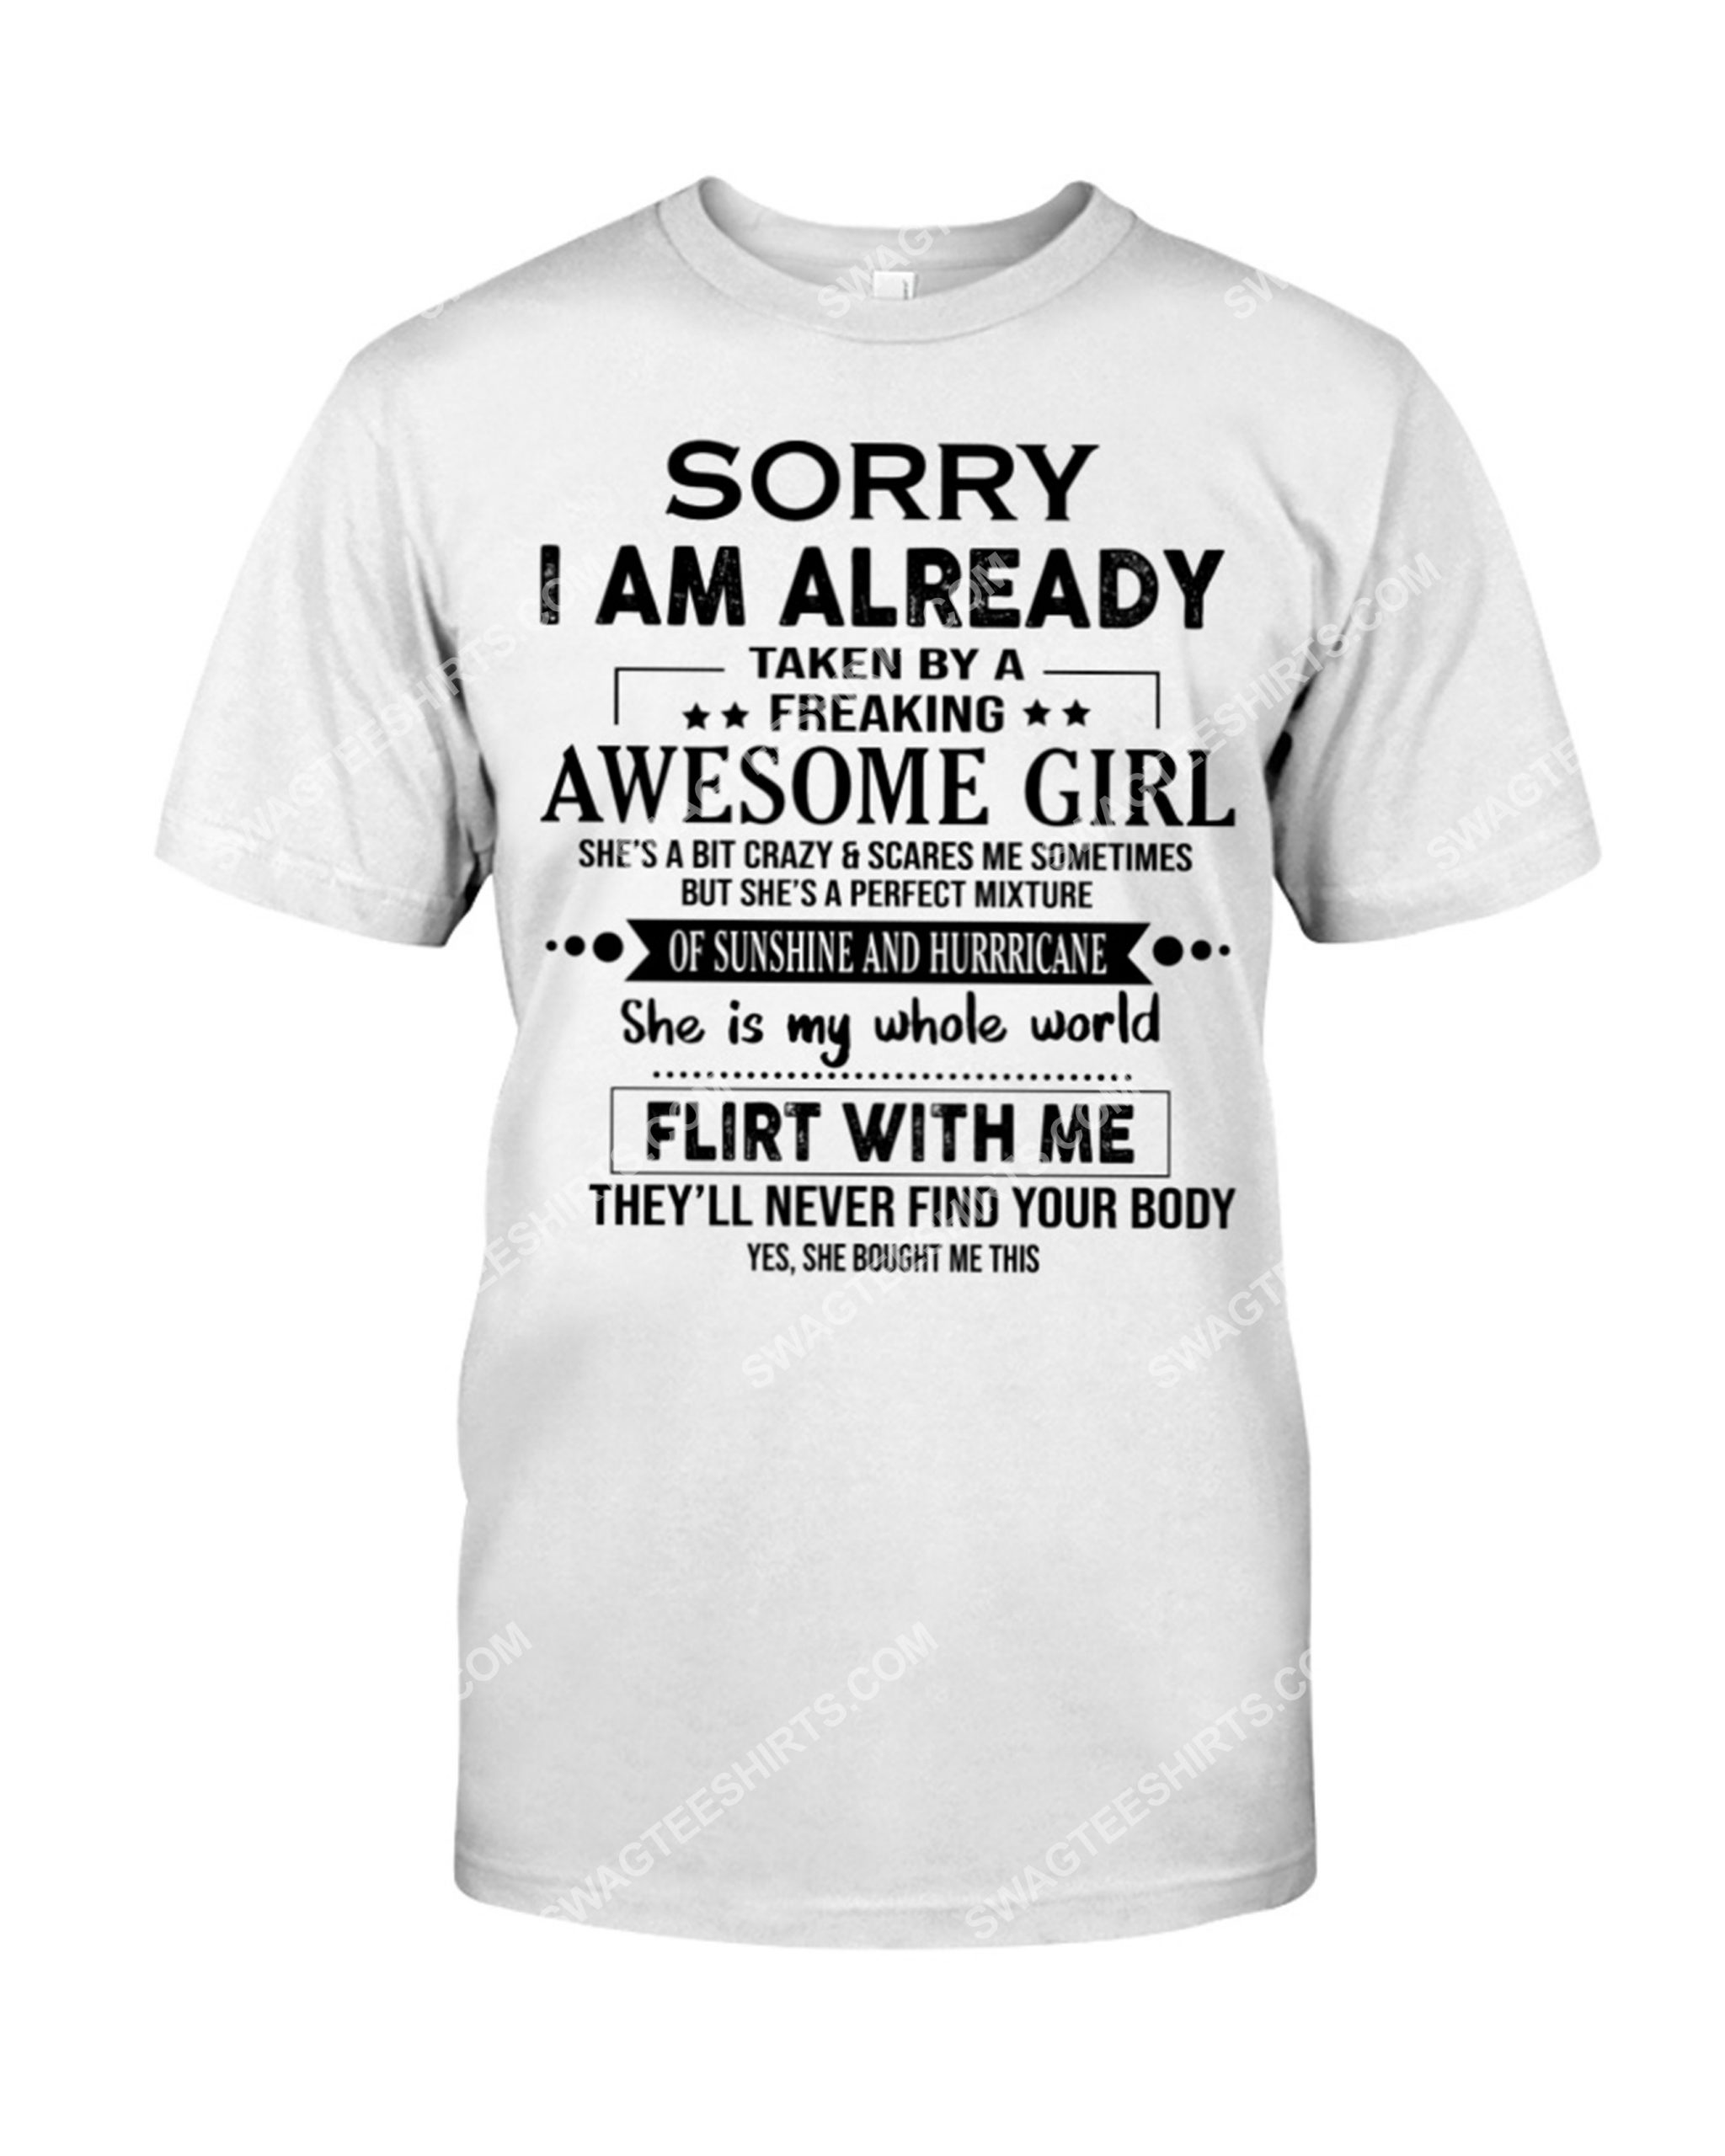 sorry i'm already taken by a freaking awesome girl shirt 1(1)